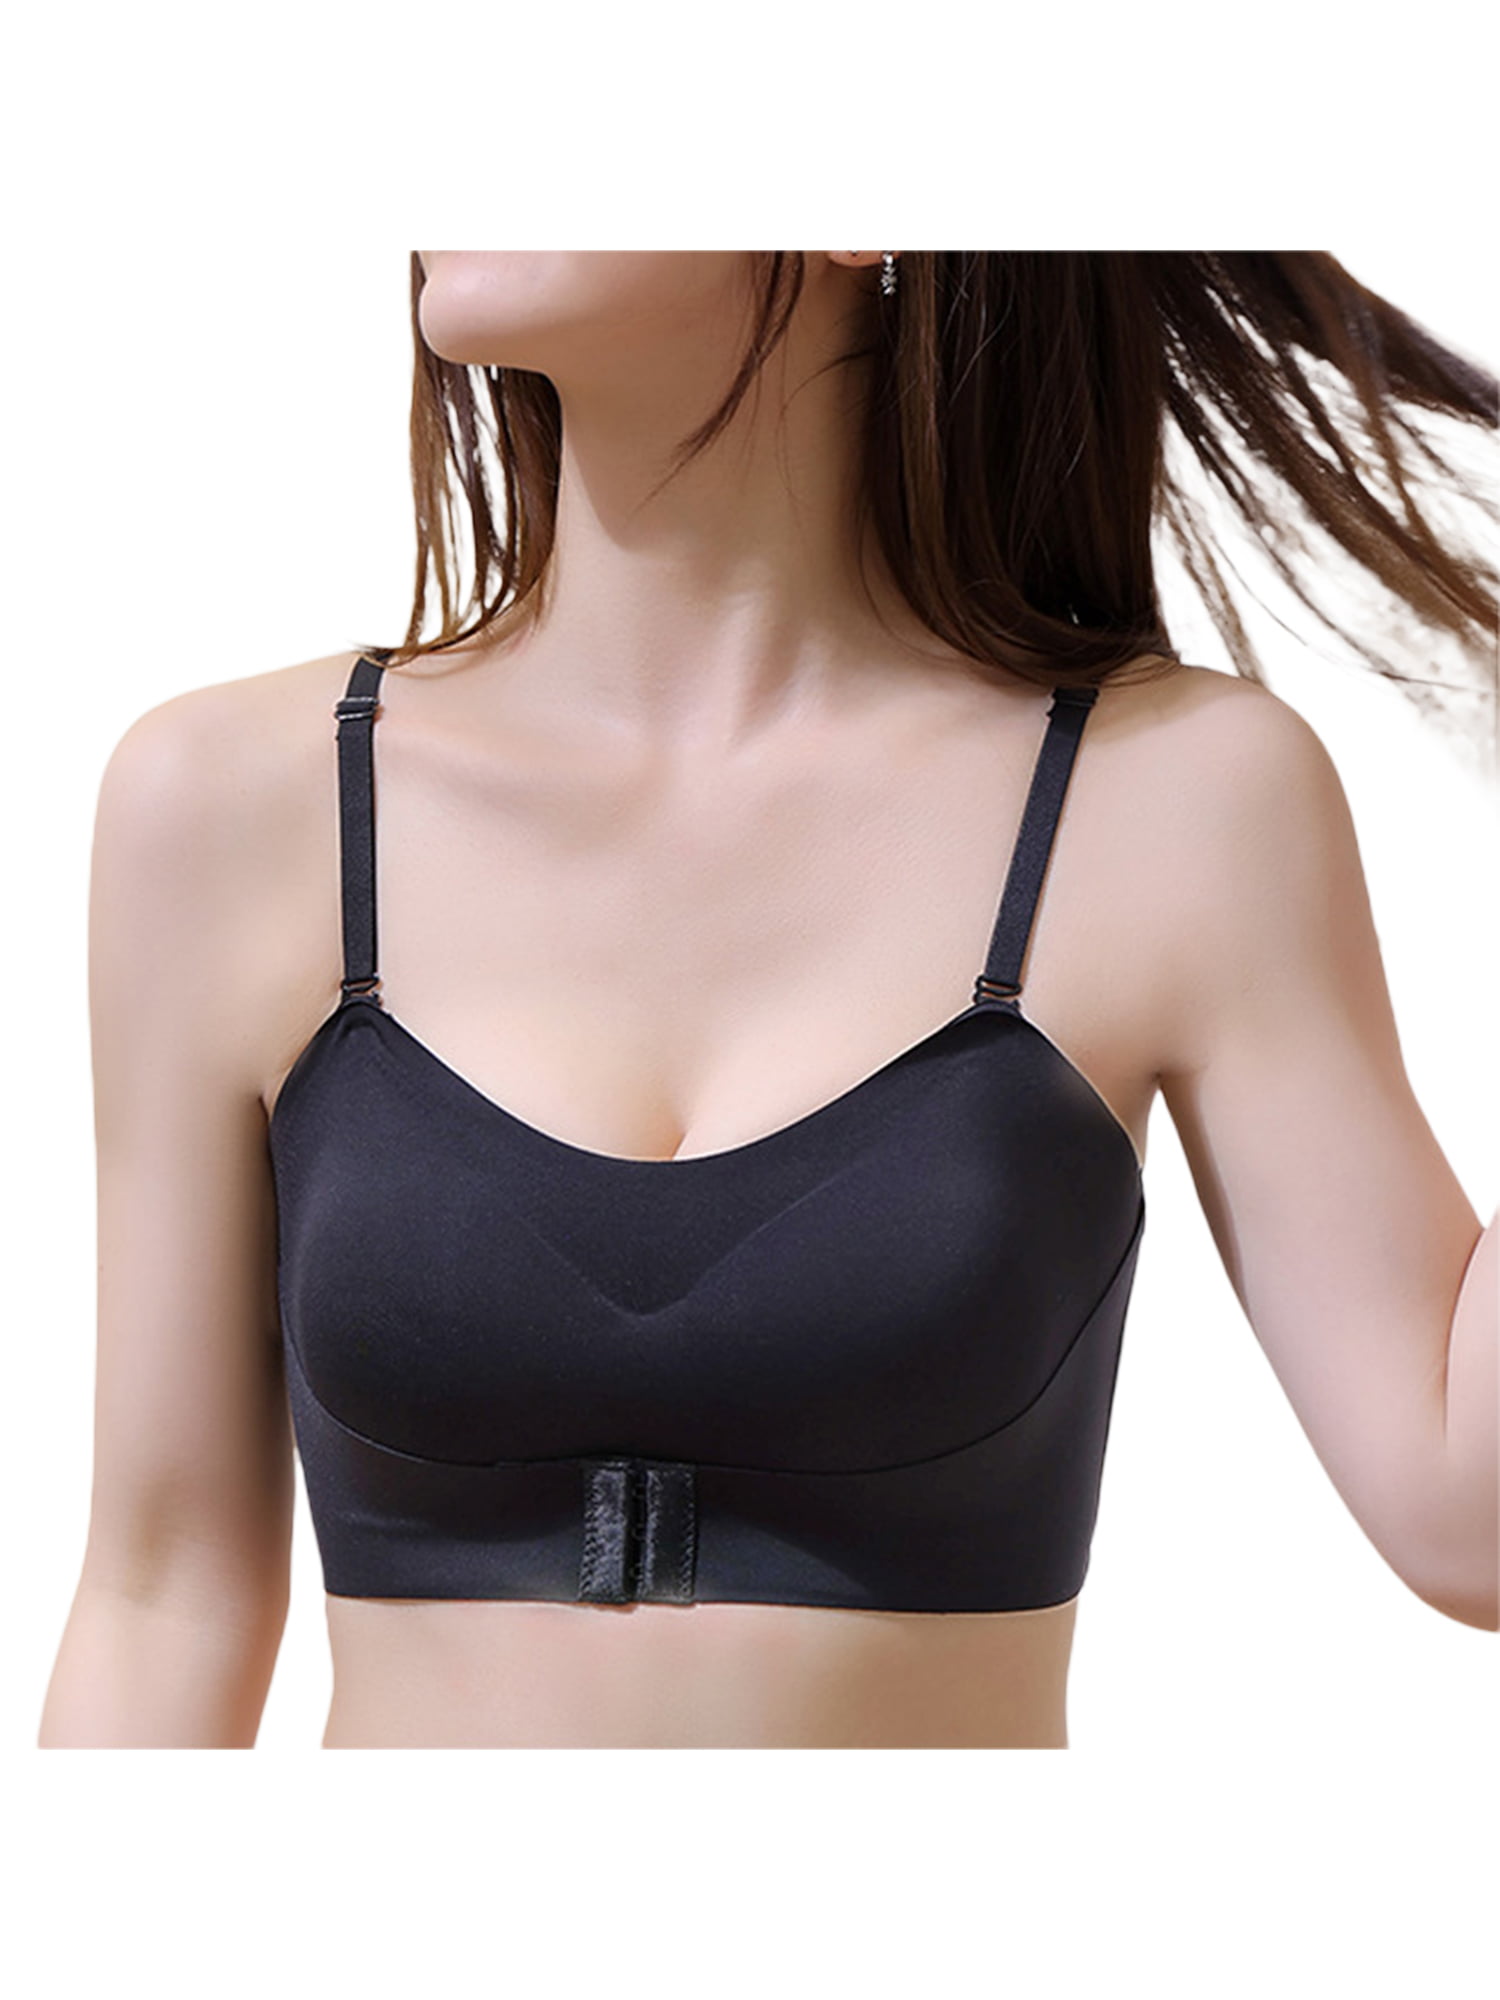 Qiylii Women Lingerie Strapless Front Buckle Lift Bra Wire-Free Anti-Slip  Invisible Push Up Bandeau Bra 